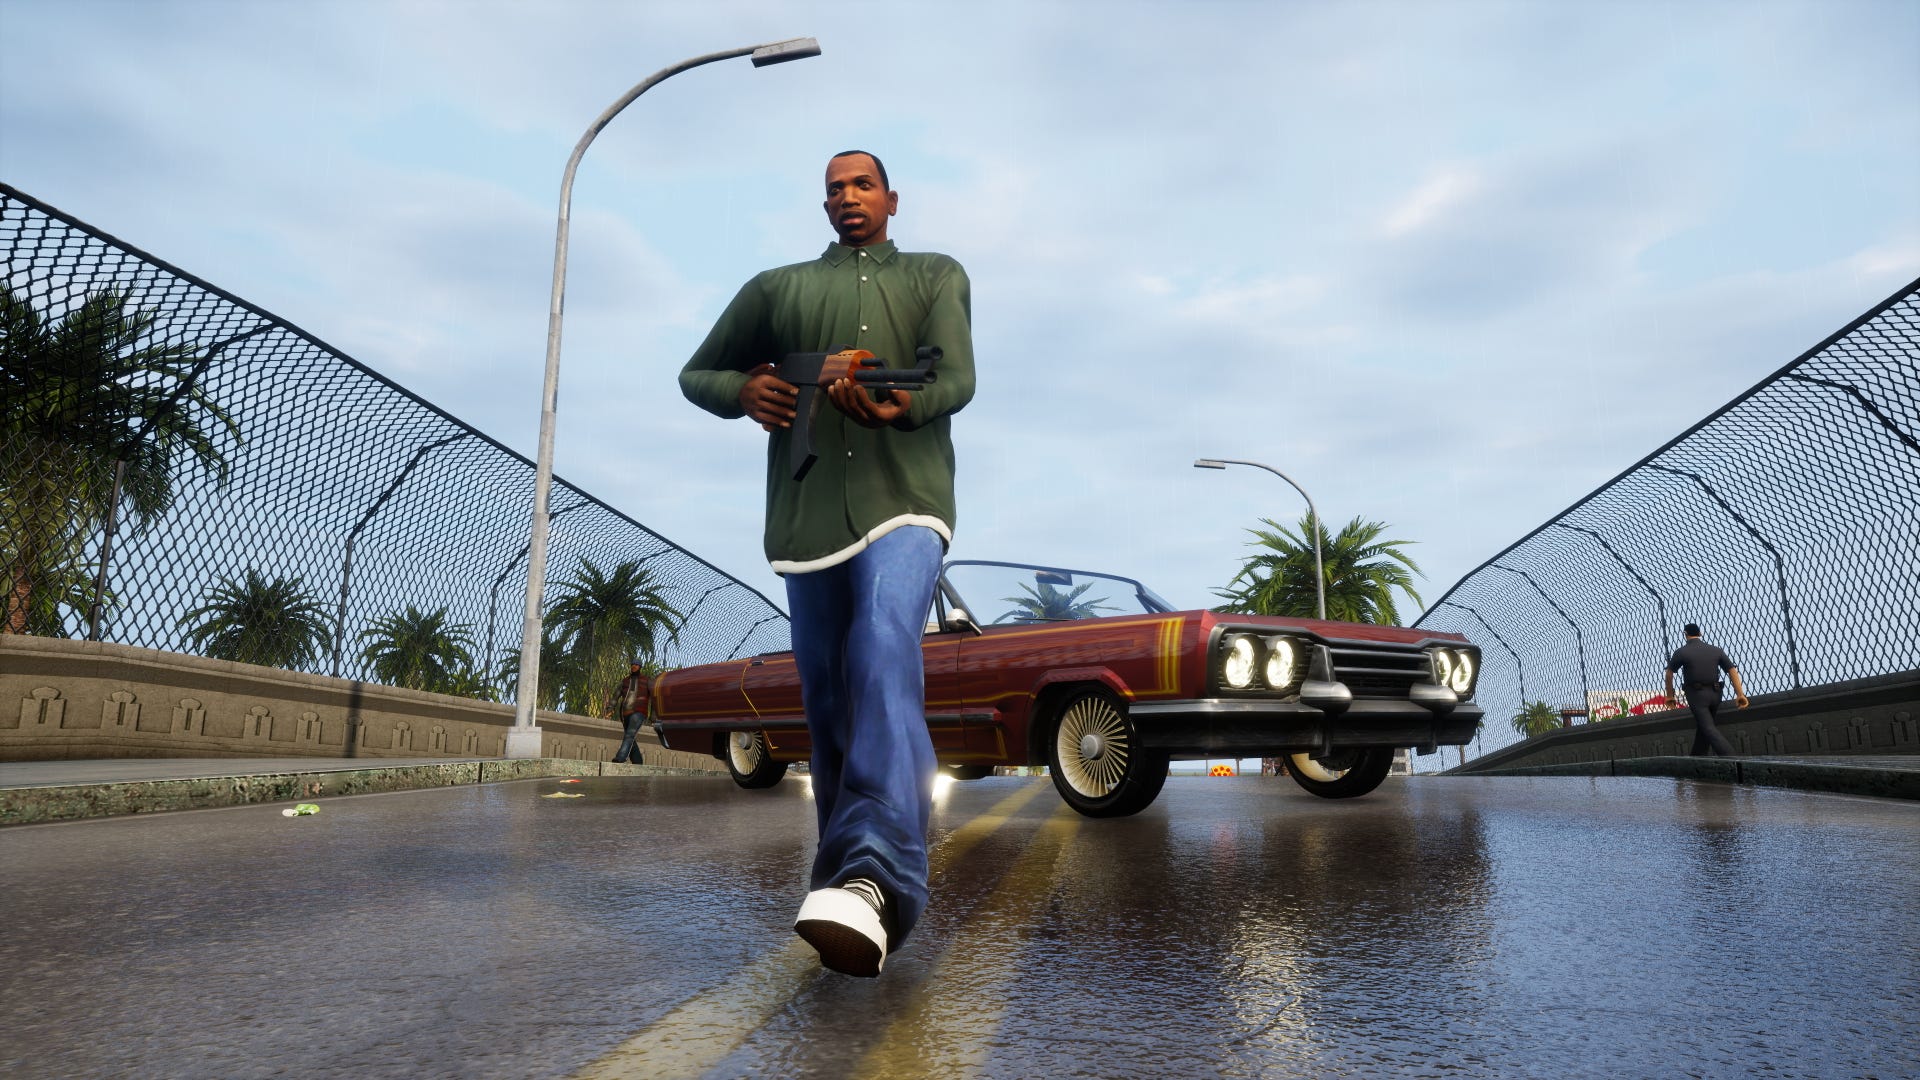 offset scheuren Antagonist GTA San Andreas cheats - PlayStation, Xbox, PC, and Switch | VG247